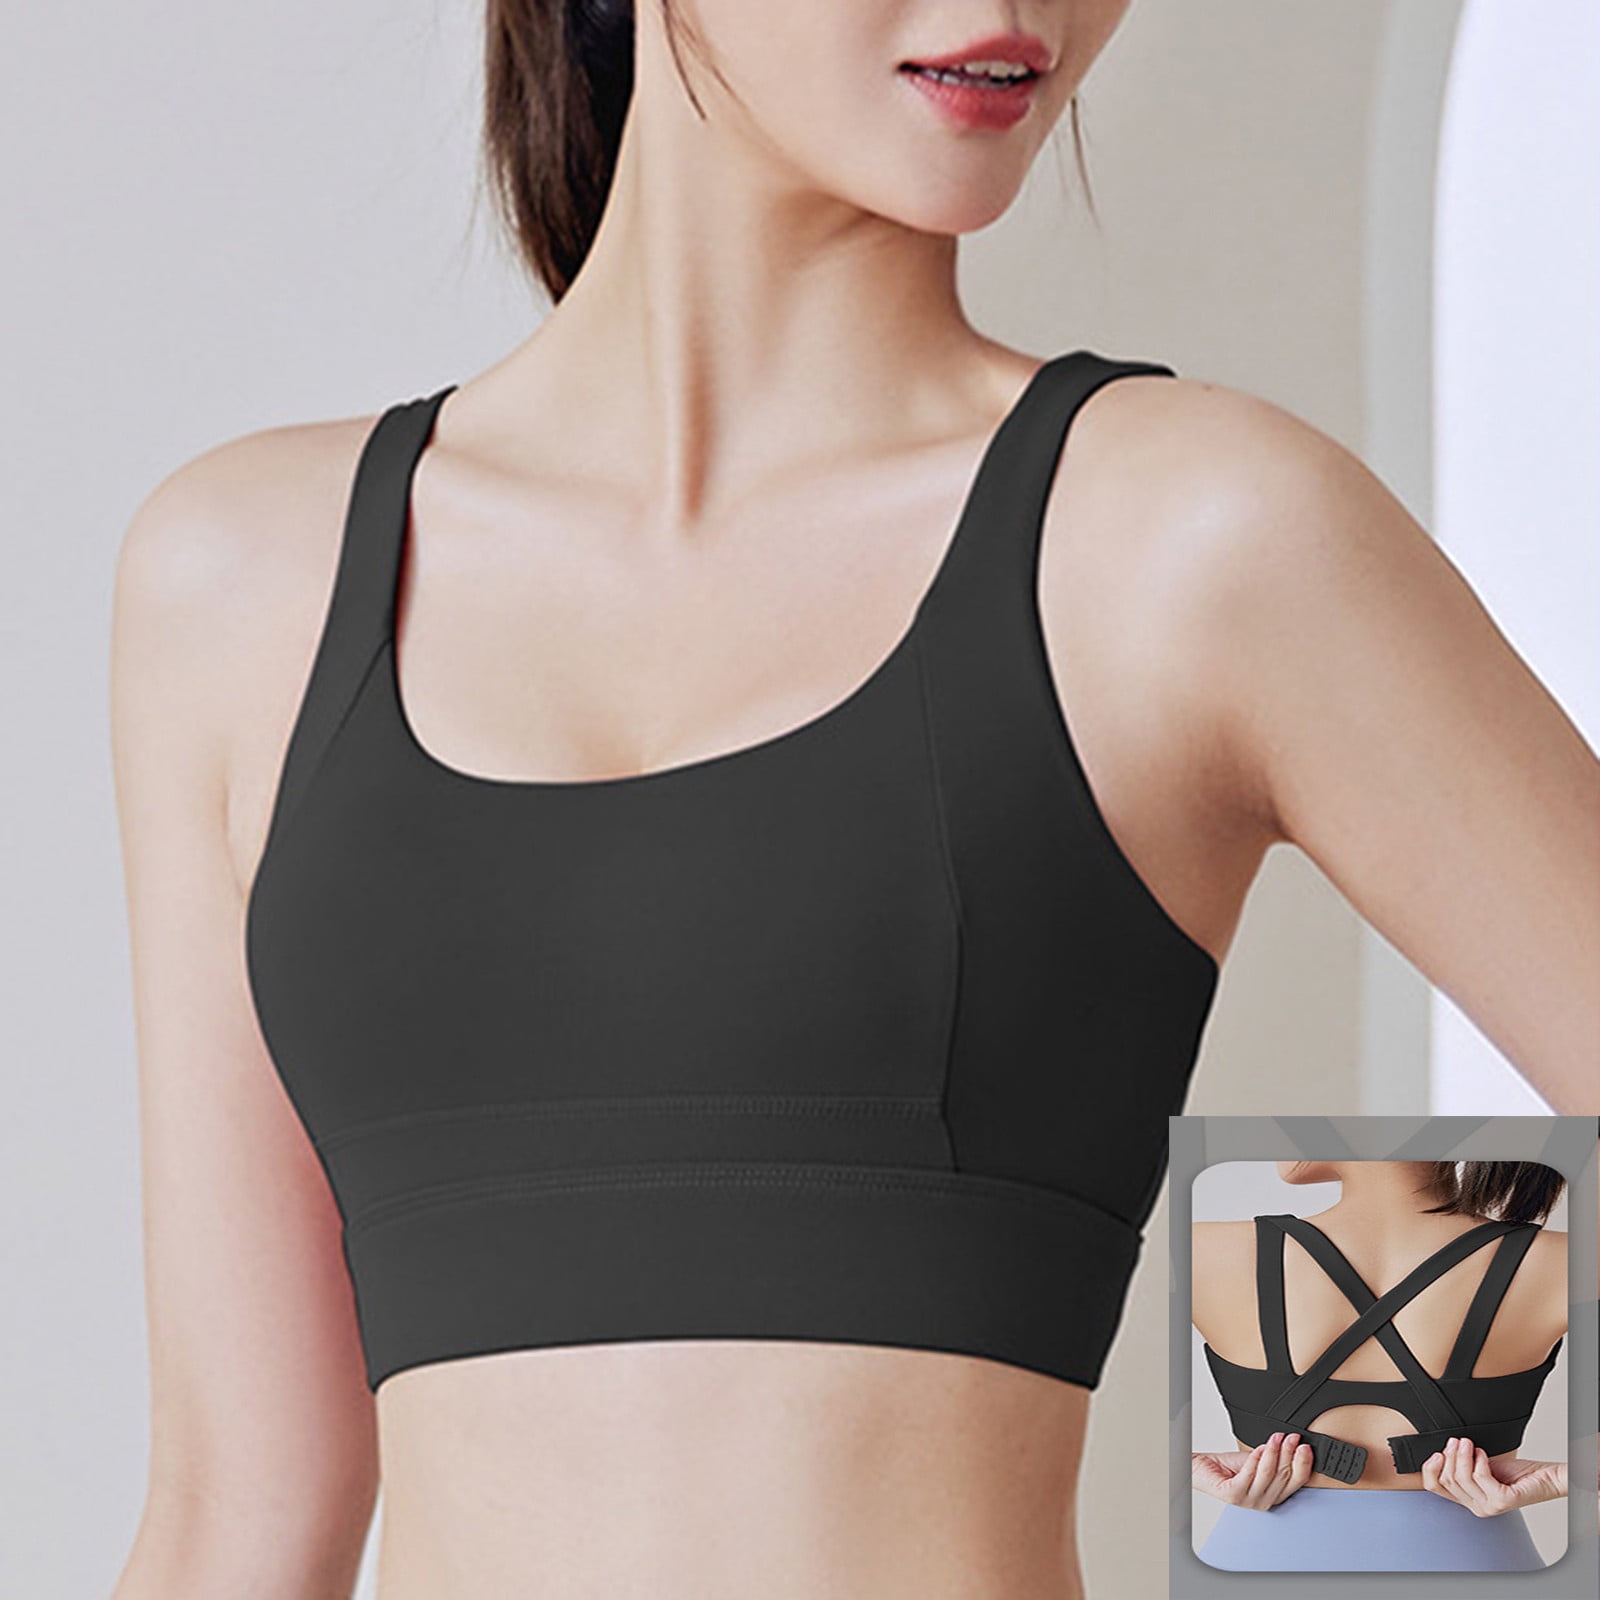 Aueoeo Sports Bras for Women, Bralettes for Women With Support